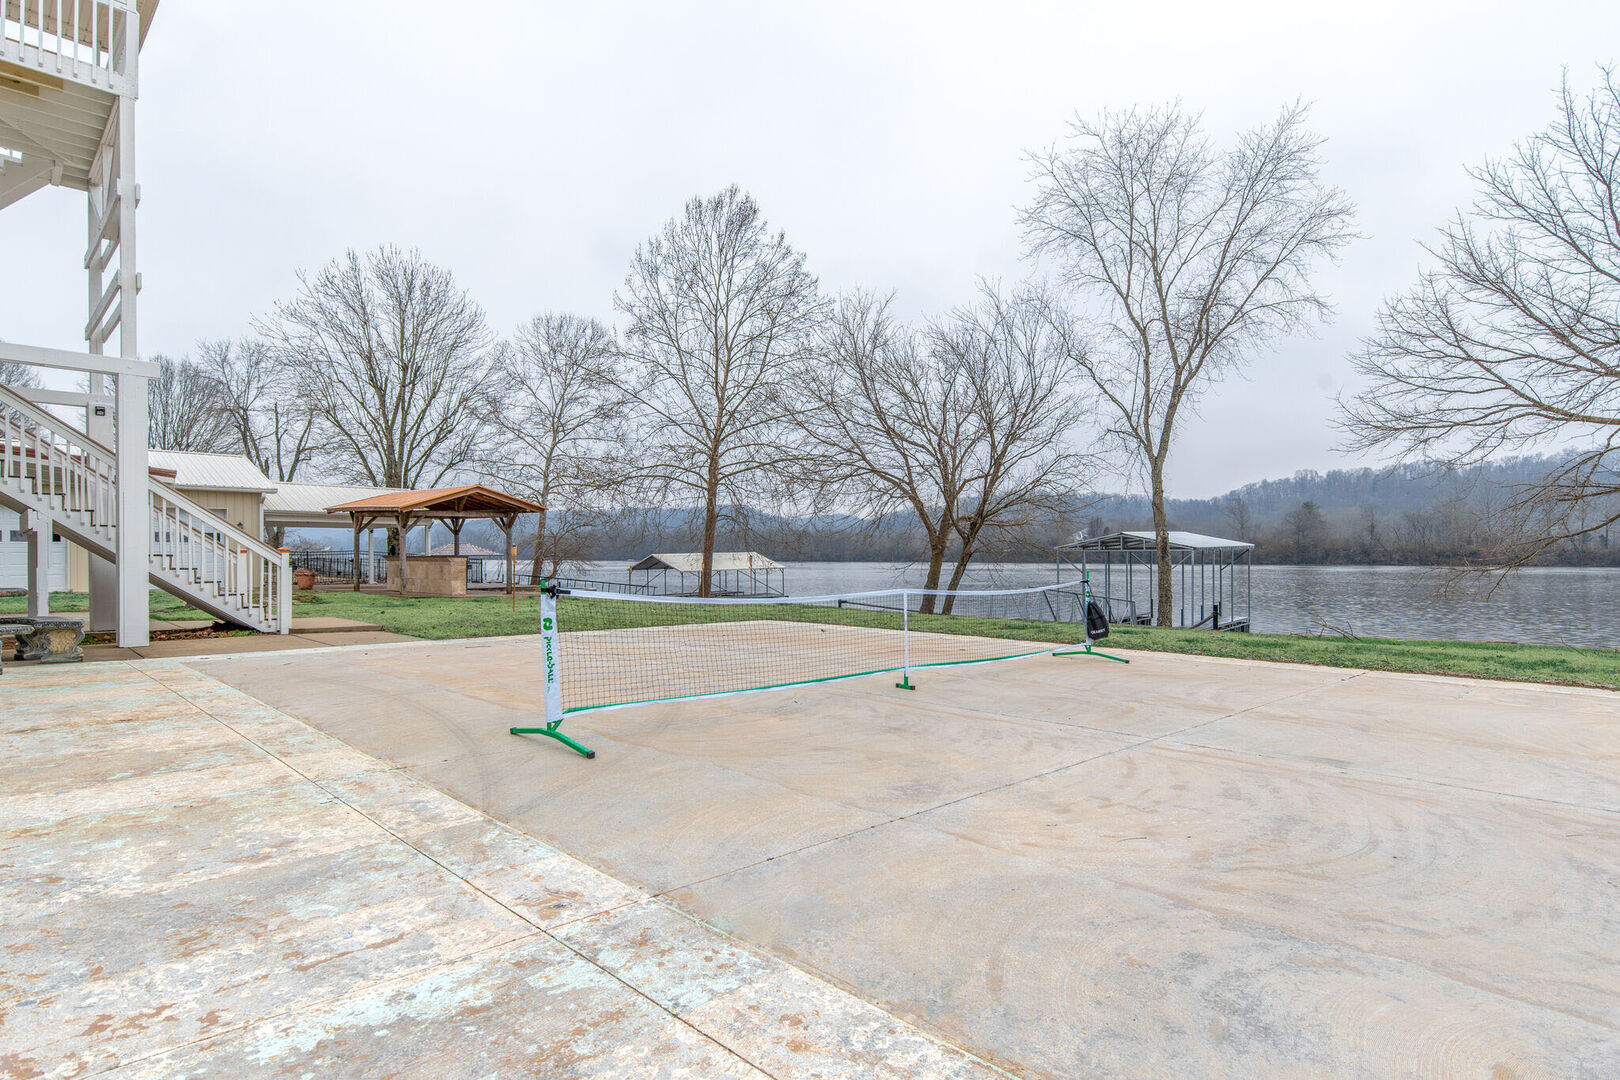 Riverfront property with private dock, BBQ grill, basketball hoop, tennis/pickle-ball net, and fire pit.